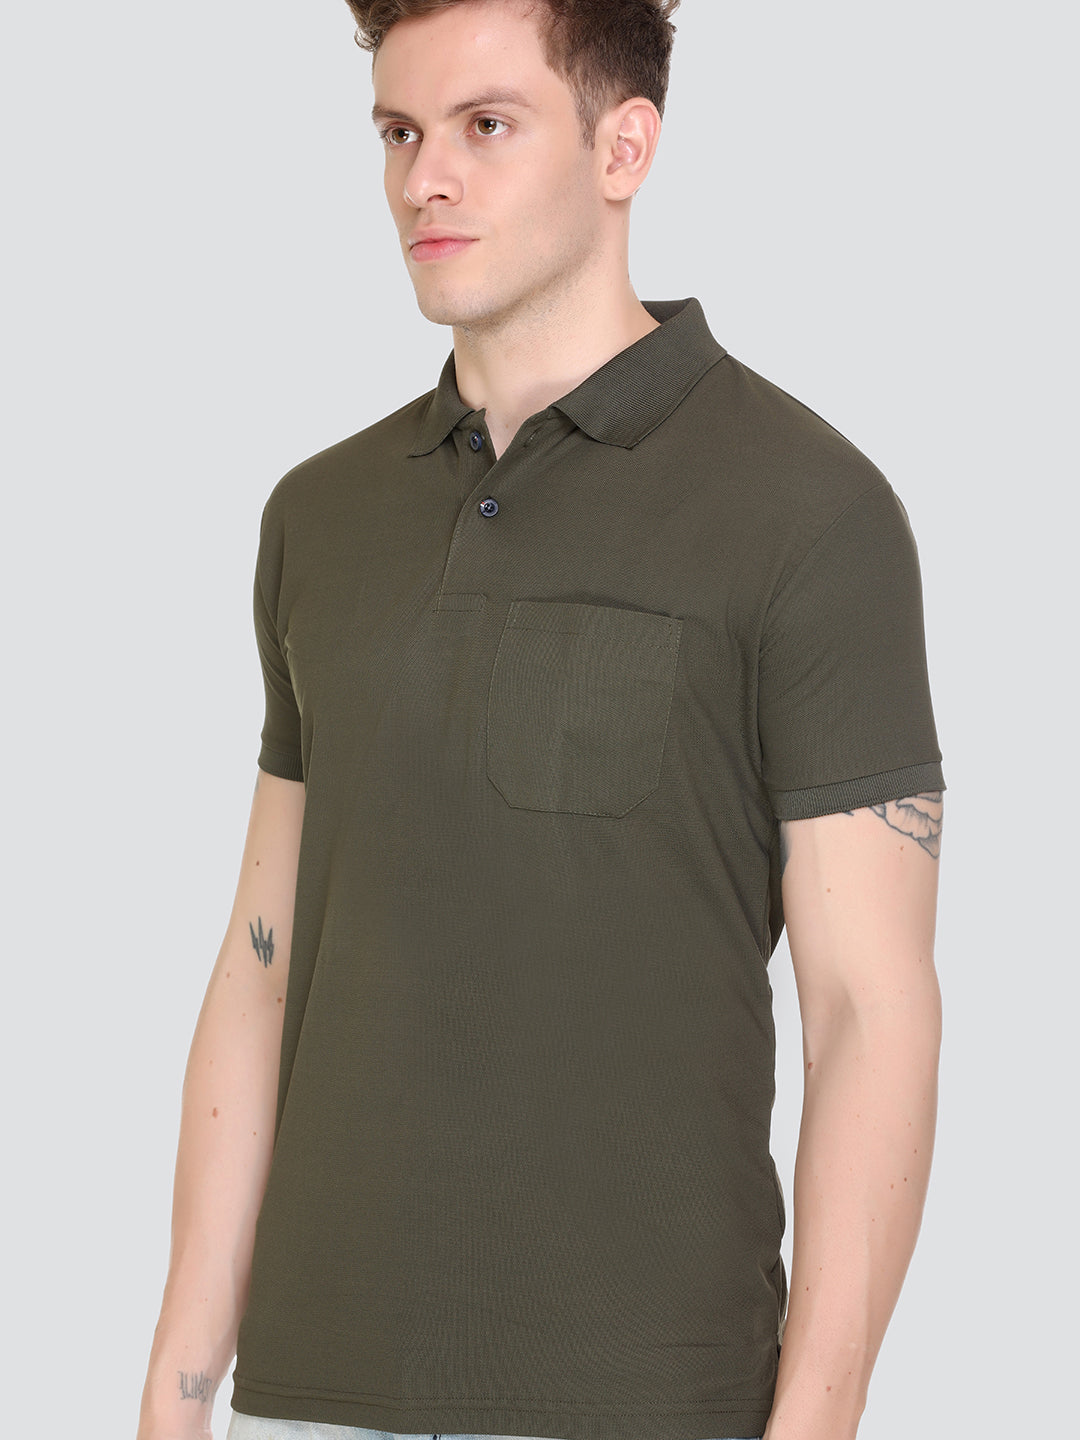 Comfortable Jinxer Olive Green Dry Fit Polo Neck T Shirt for men online in India